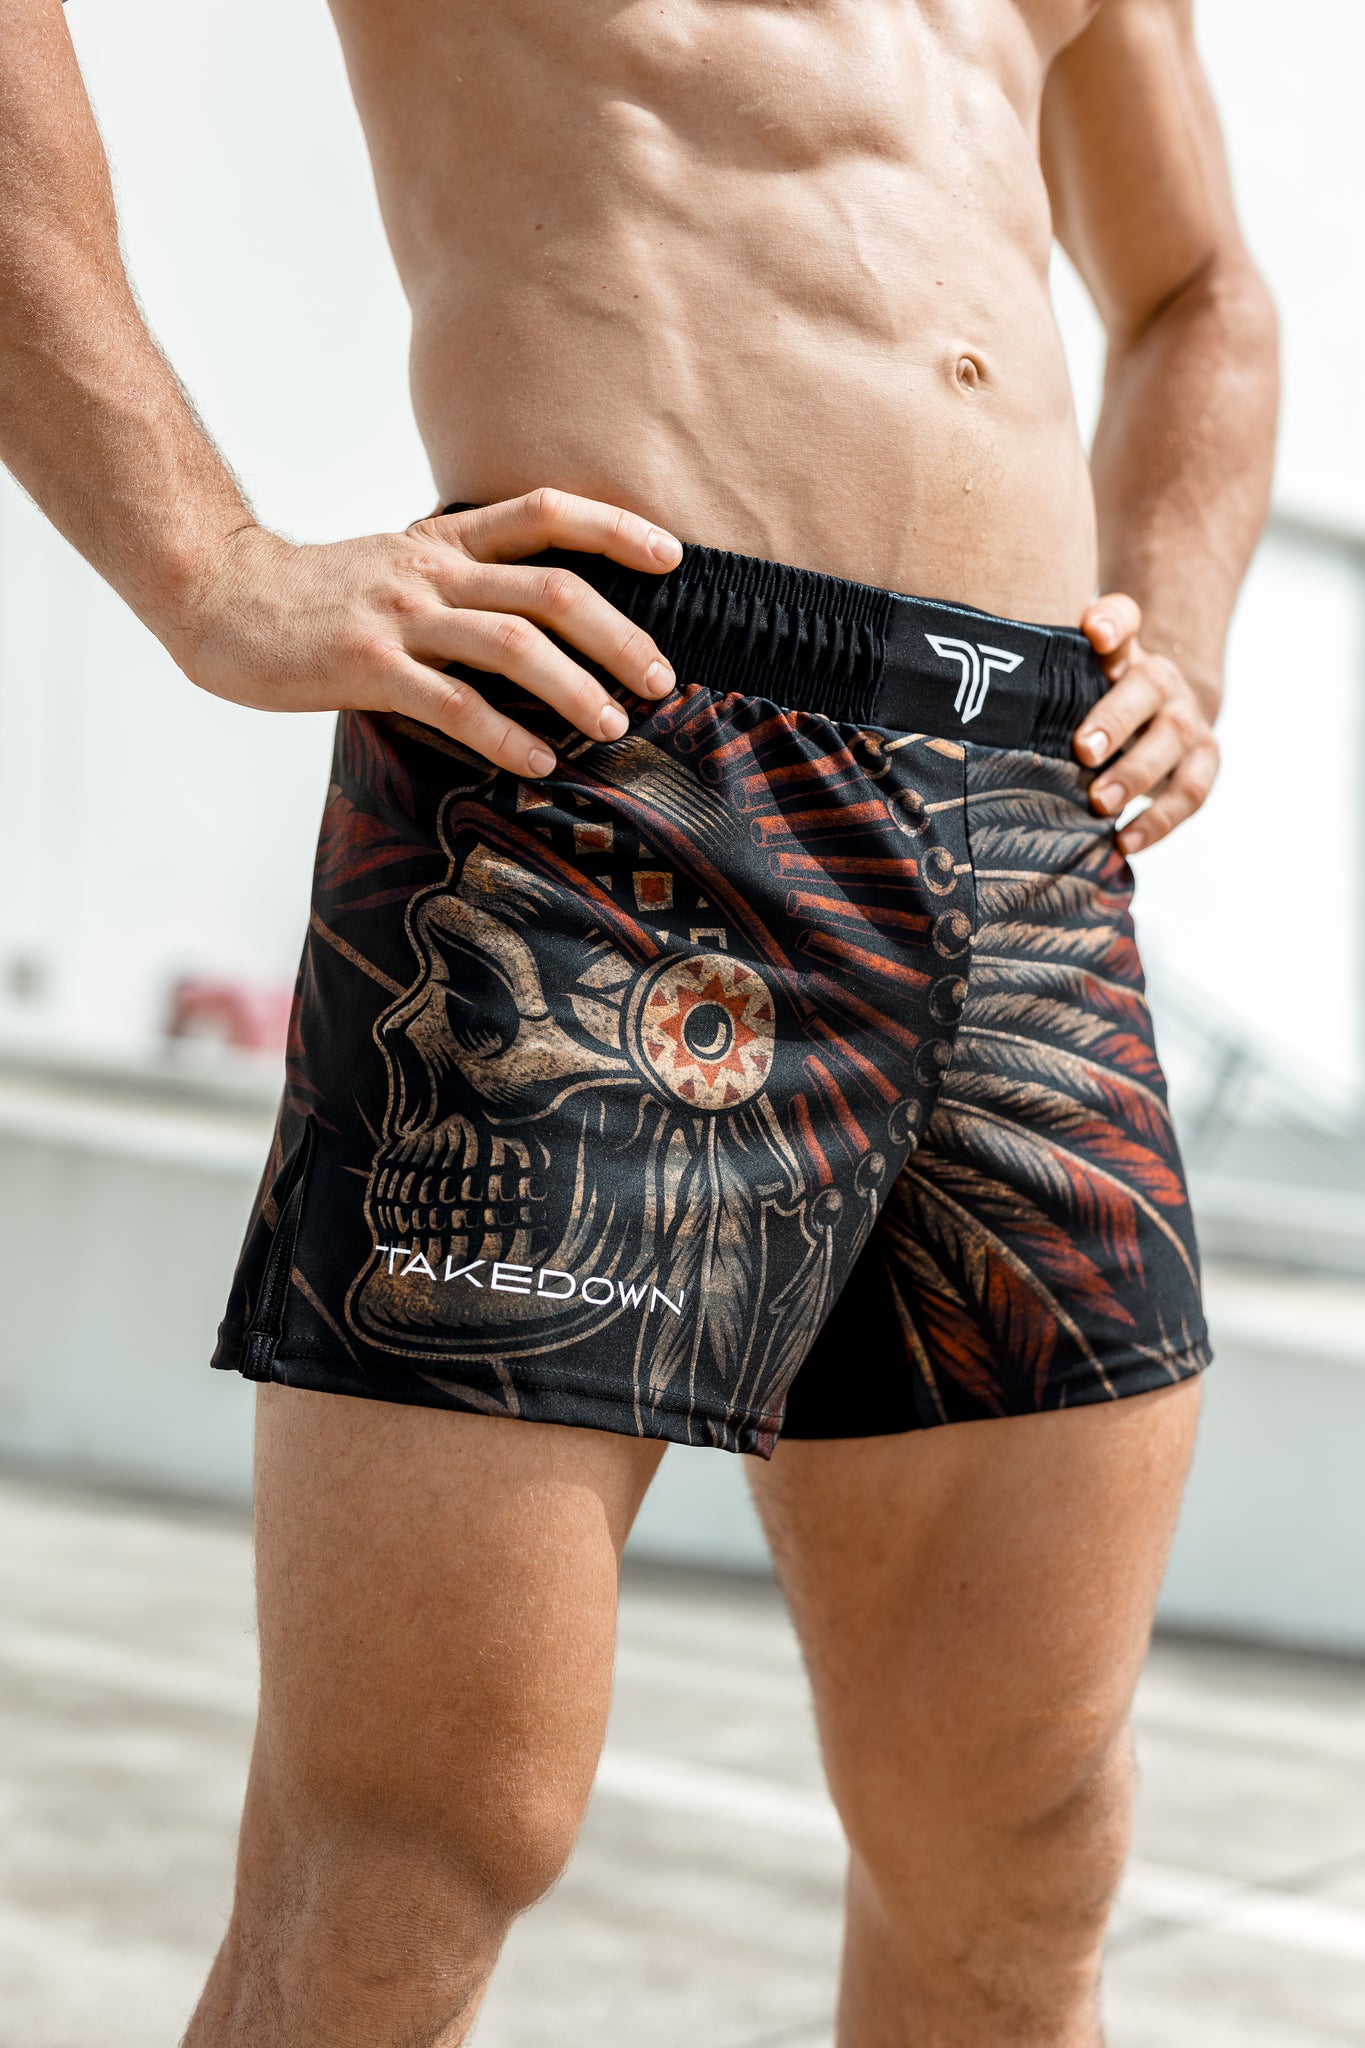 MMA Fight Shorts from Made4Fighters